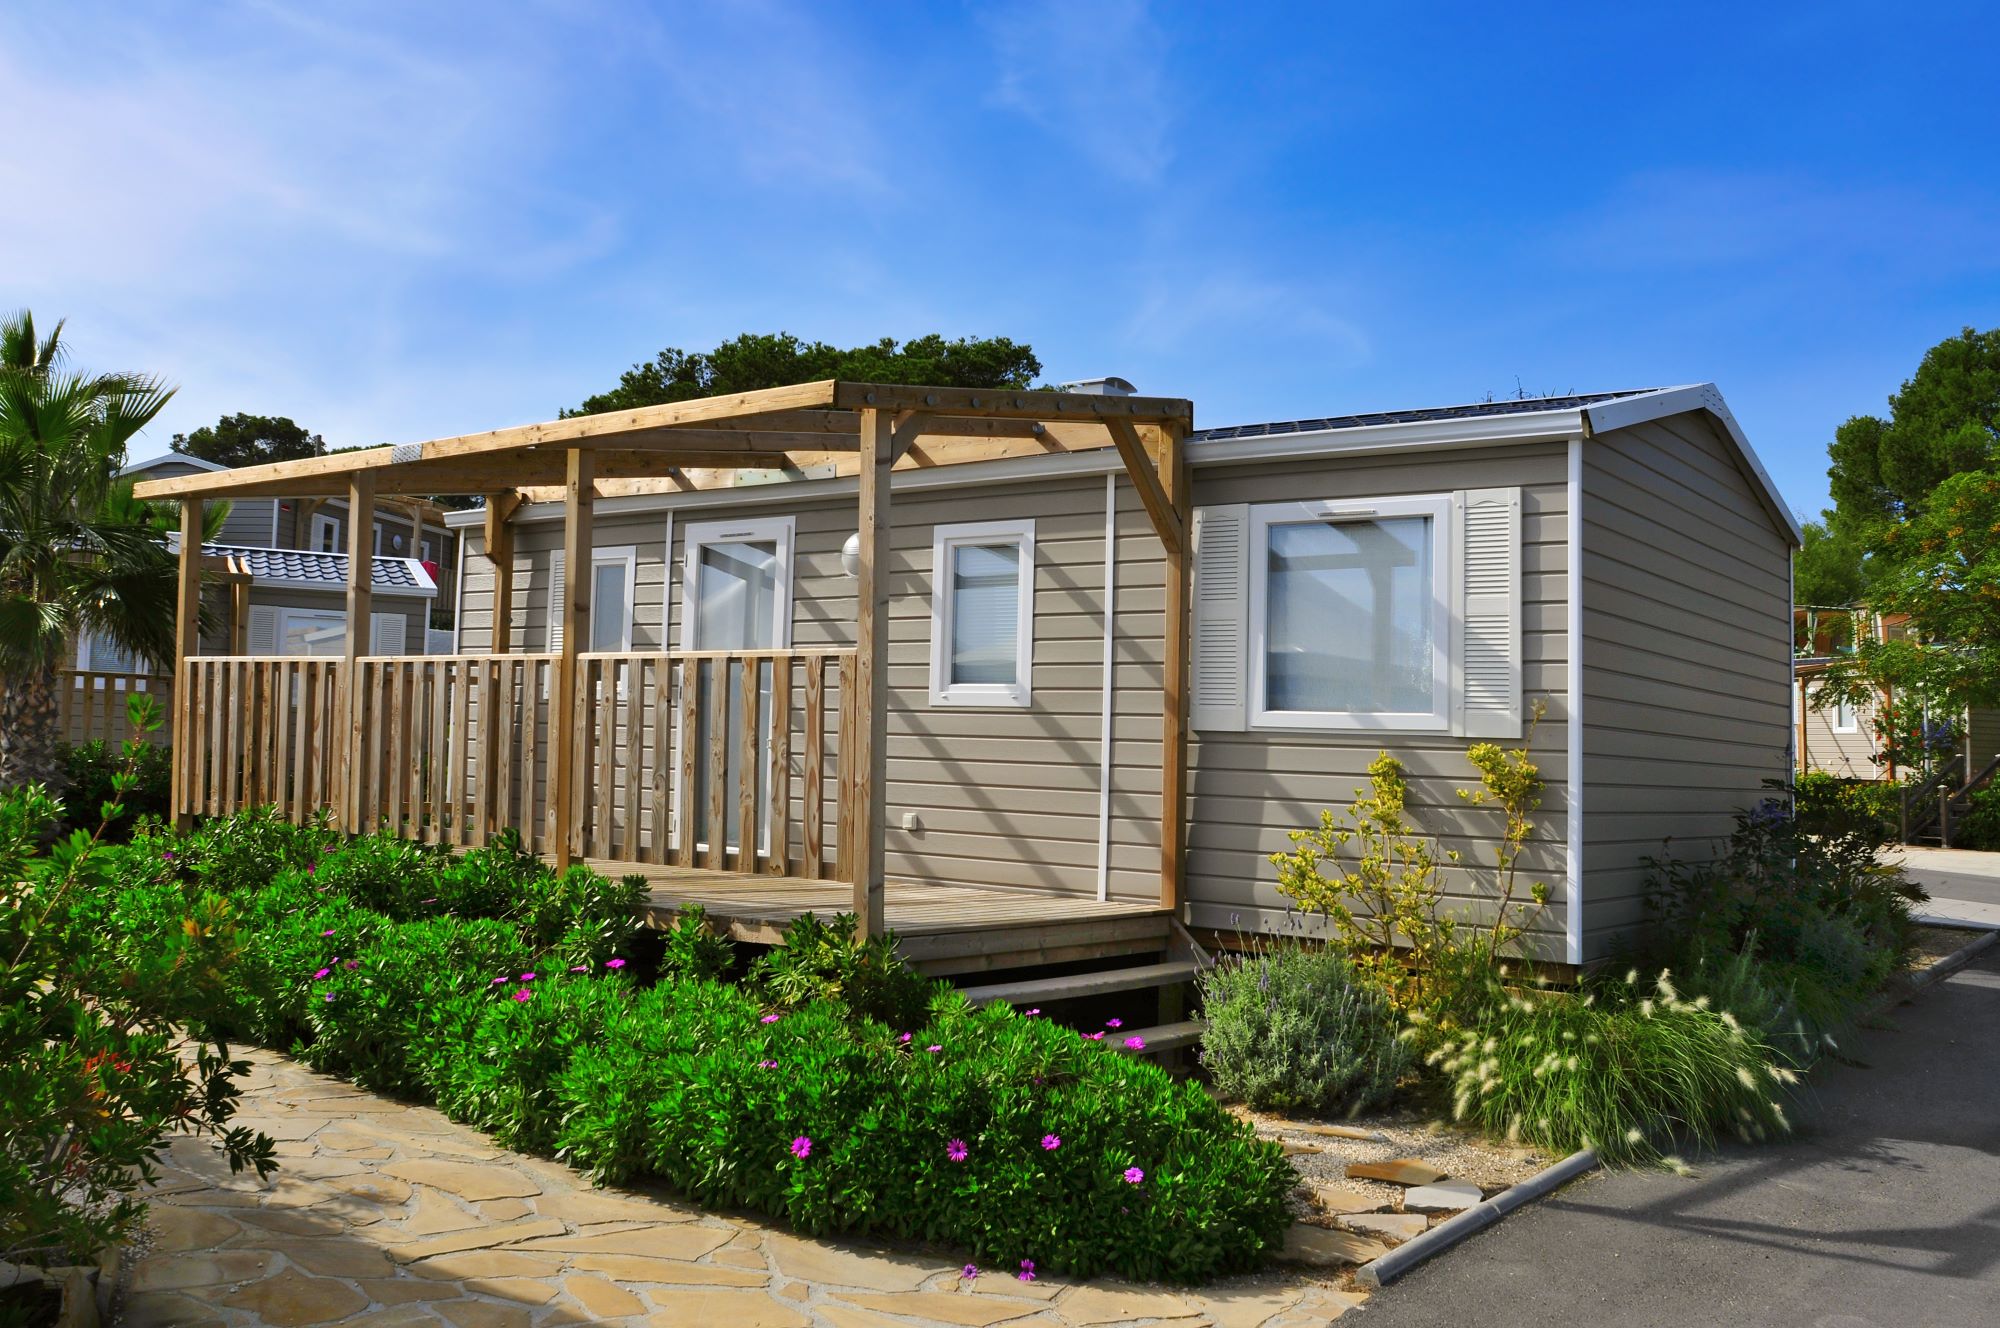 6 Facts For Seniors To Consider Before Buying a Manufactured Home